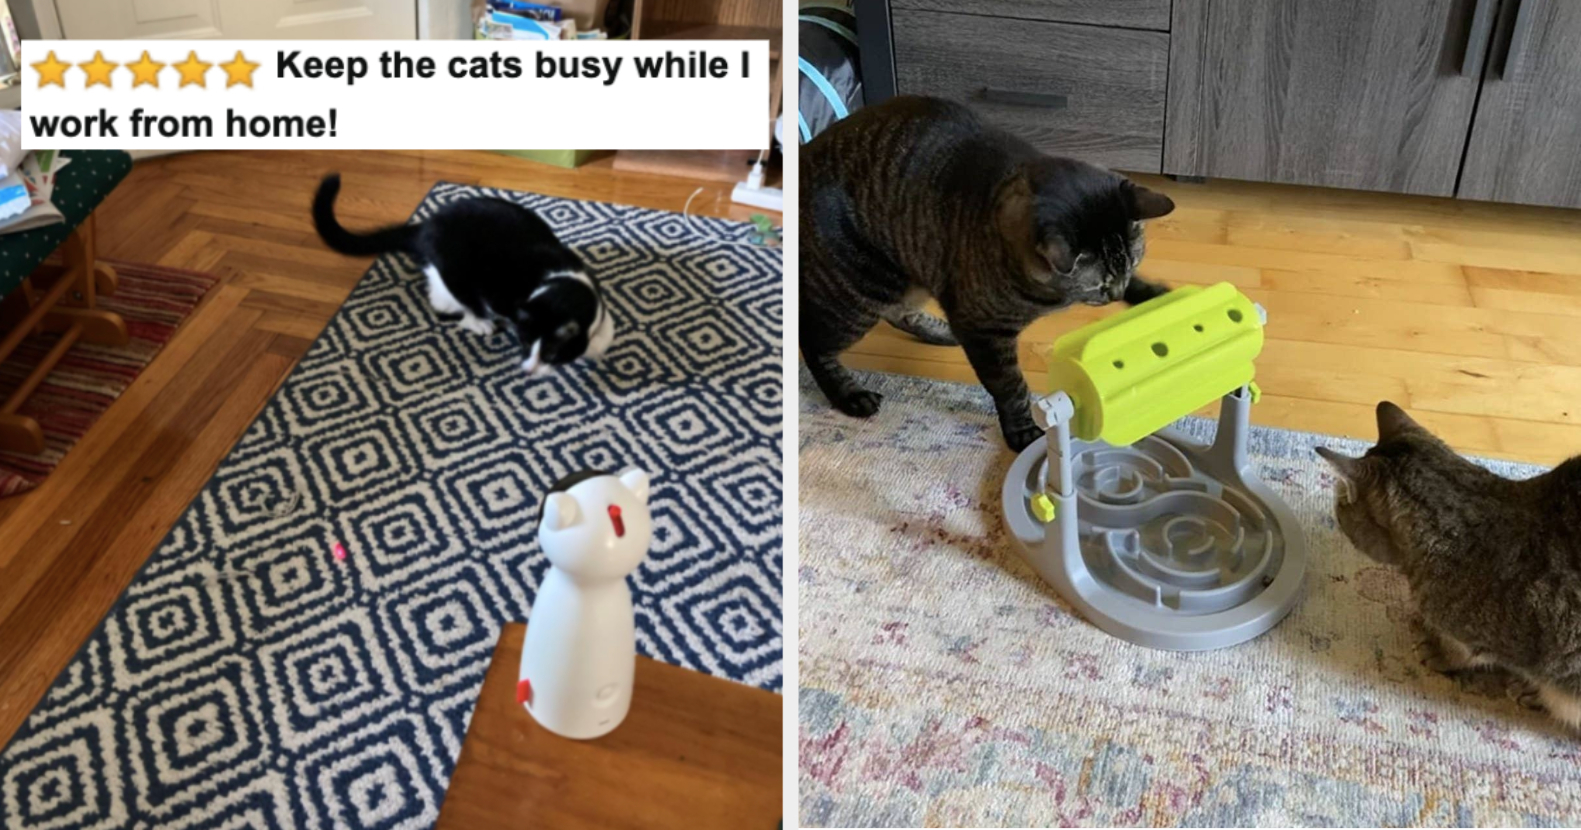 DIY Puzzle Feeders Help Bring Out TheTrue Nature of Cats - The